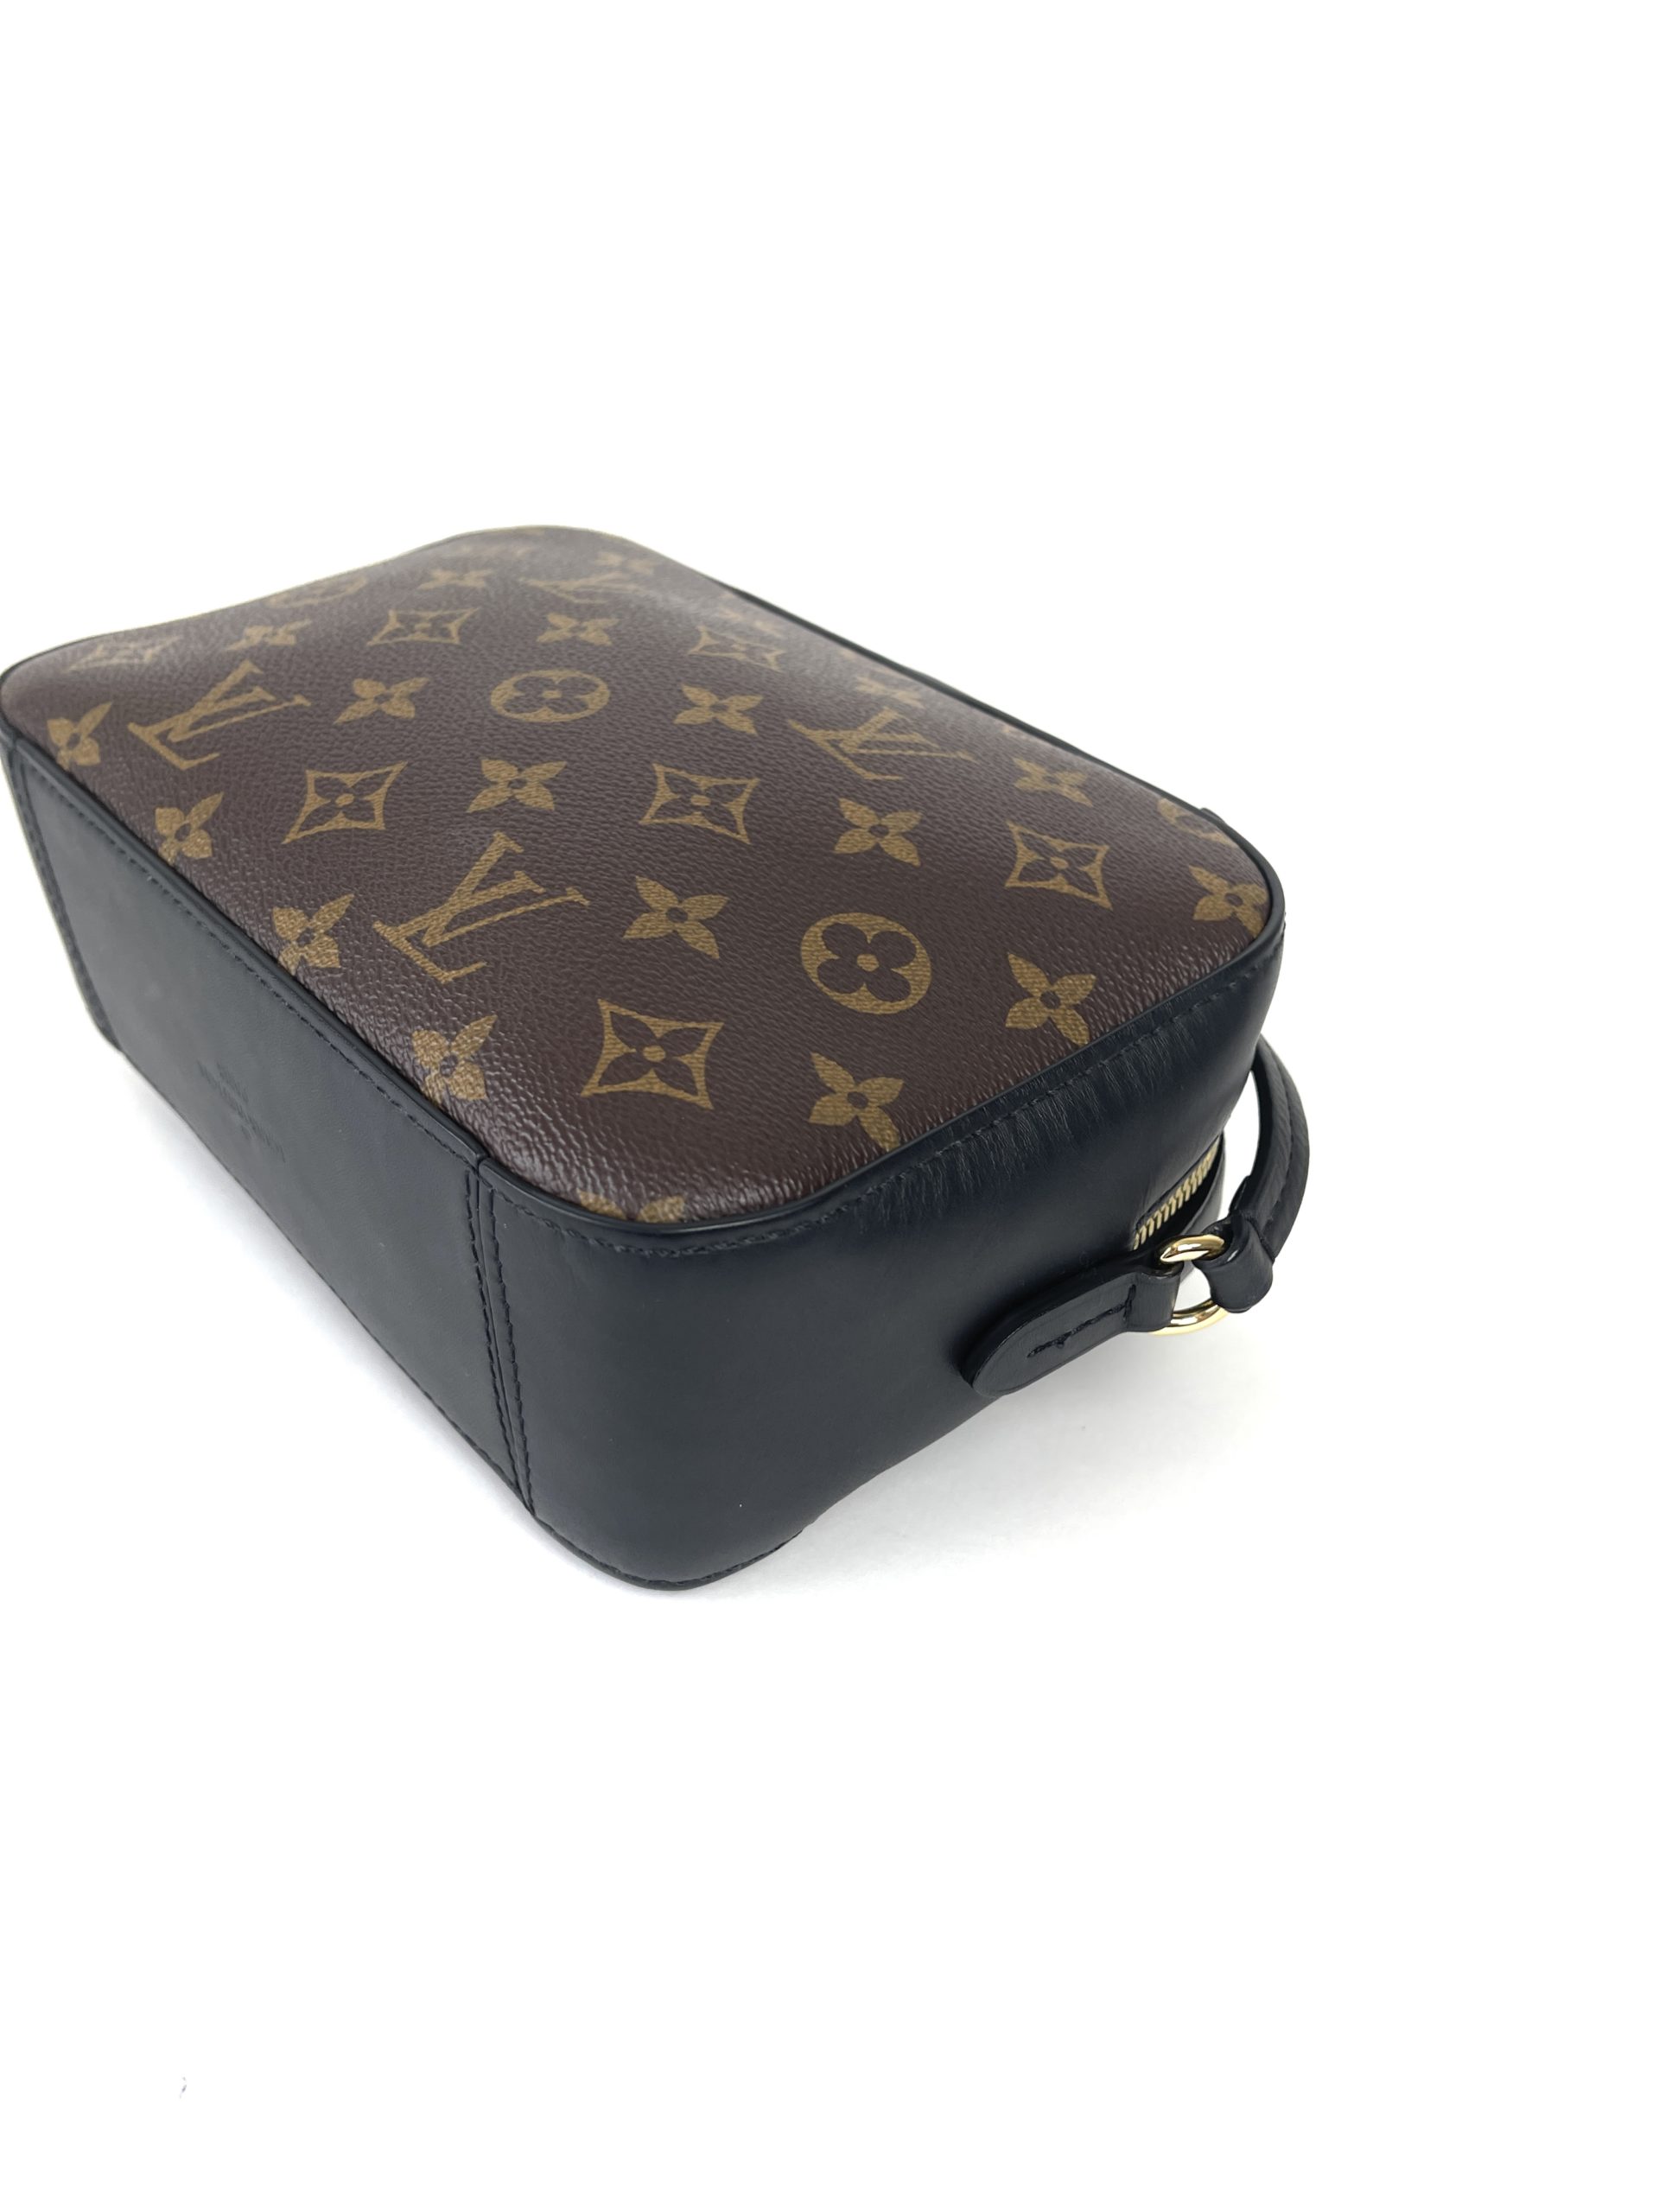 I pulled the plug! LV OnTheGo MM in Black Empriente! : r/Louisvuitton